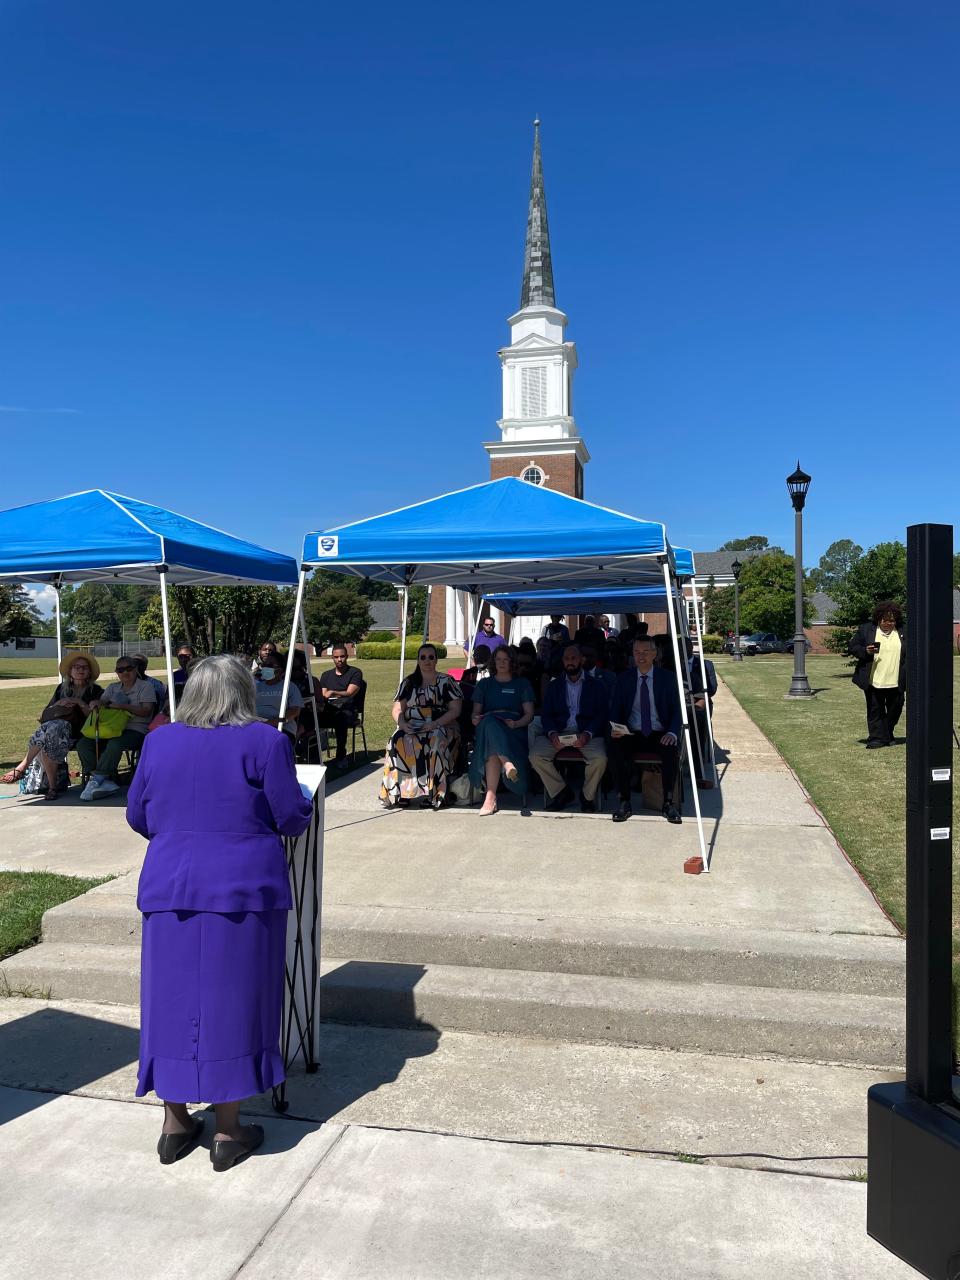 Paine College President Dr. Cheryl Evans Jones speaks to guests Thursday, May 2, as she dedicates a state historical marker in honor of John Wesley Gilbert, the first recognized black archaeologist.  Paine's Gilbert-Lambuth Chapel, sharing its name, stands in the background.